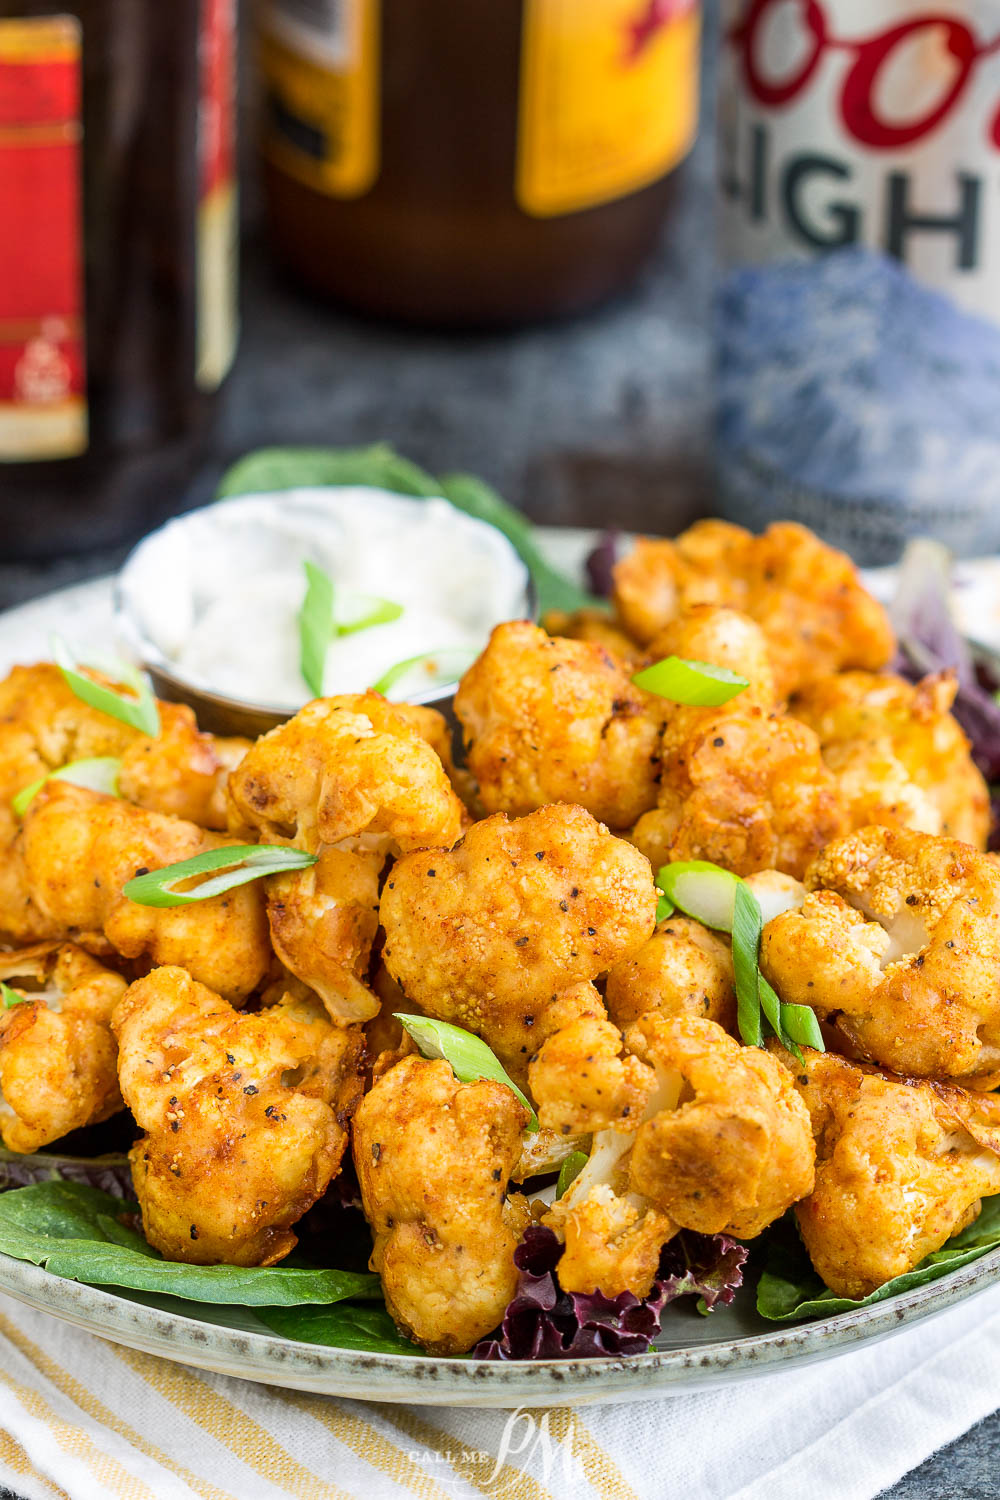 Sweet, spicy, and crispy, Nashville Hot Cauliflower Bites are a healthy alternative to traditional Nashville hot chicken and wings with none of the guilt! This recipe is easy to make and insanely delicious! They are a crispy, savory, healthy bite-sized snack, appetizer, or side.